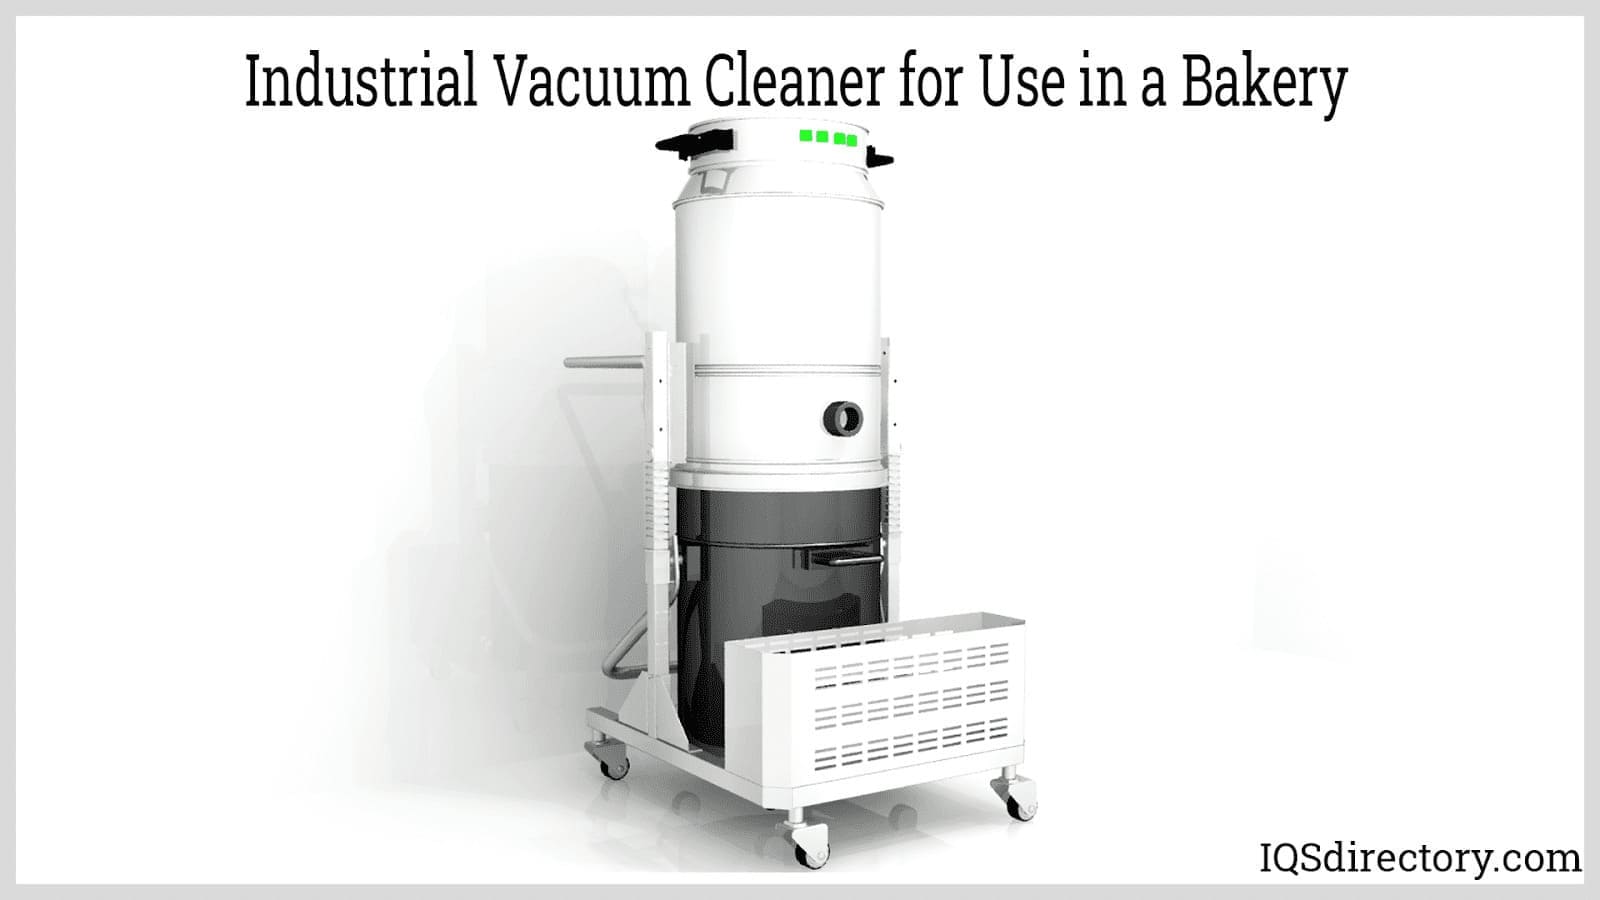 Industrial Vacuum Cleaner for Use in a Bakery